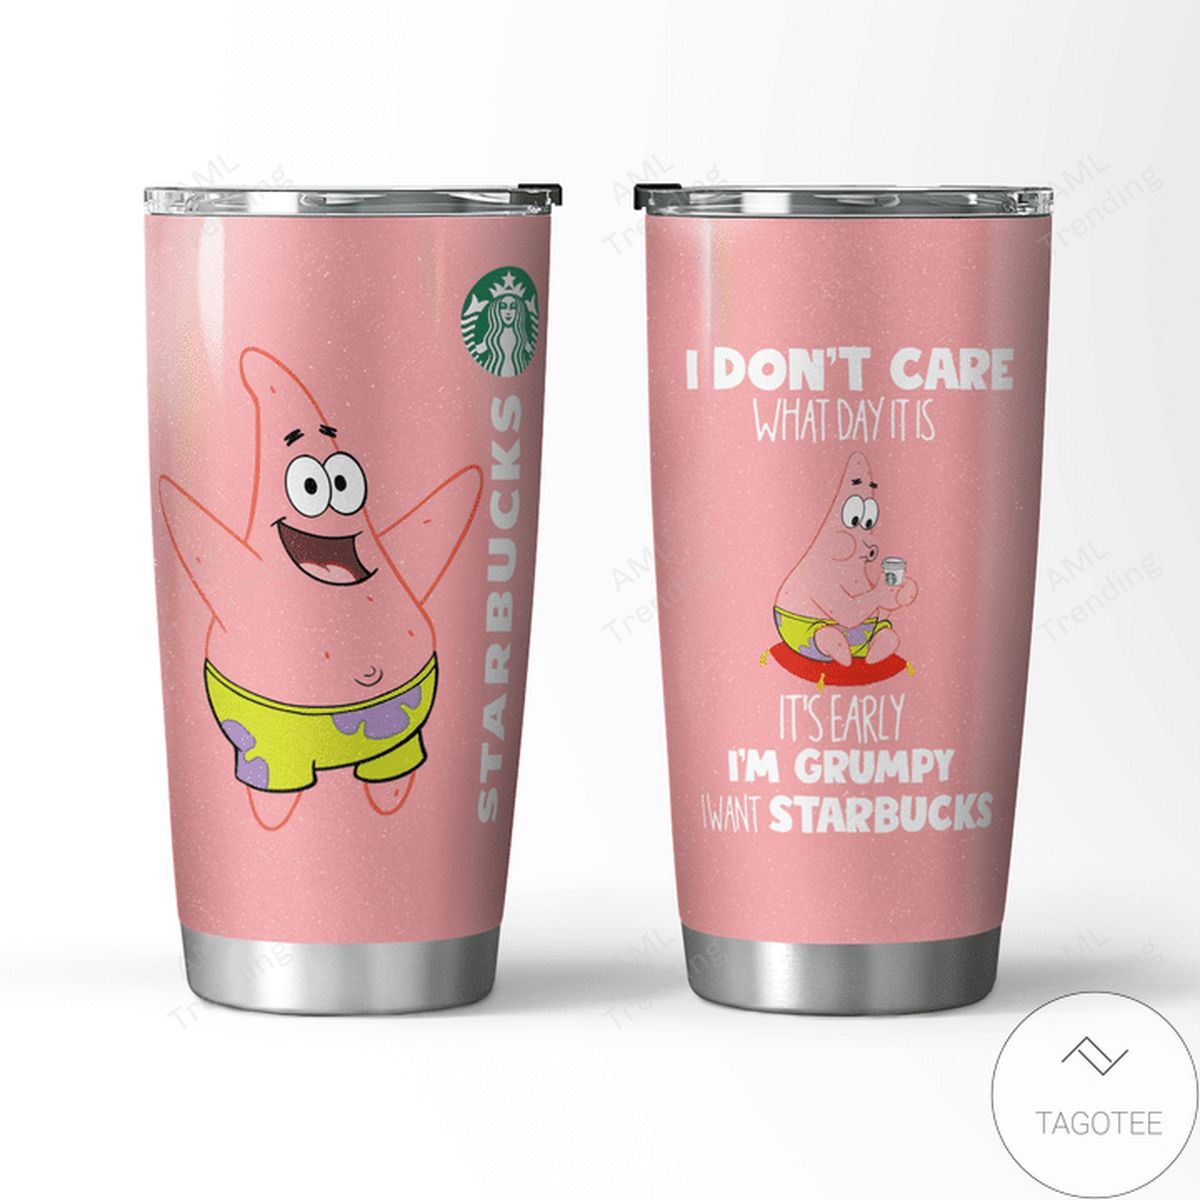 Starbucks I Don't Care What Day It Is Patrick Star Tumbler